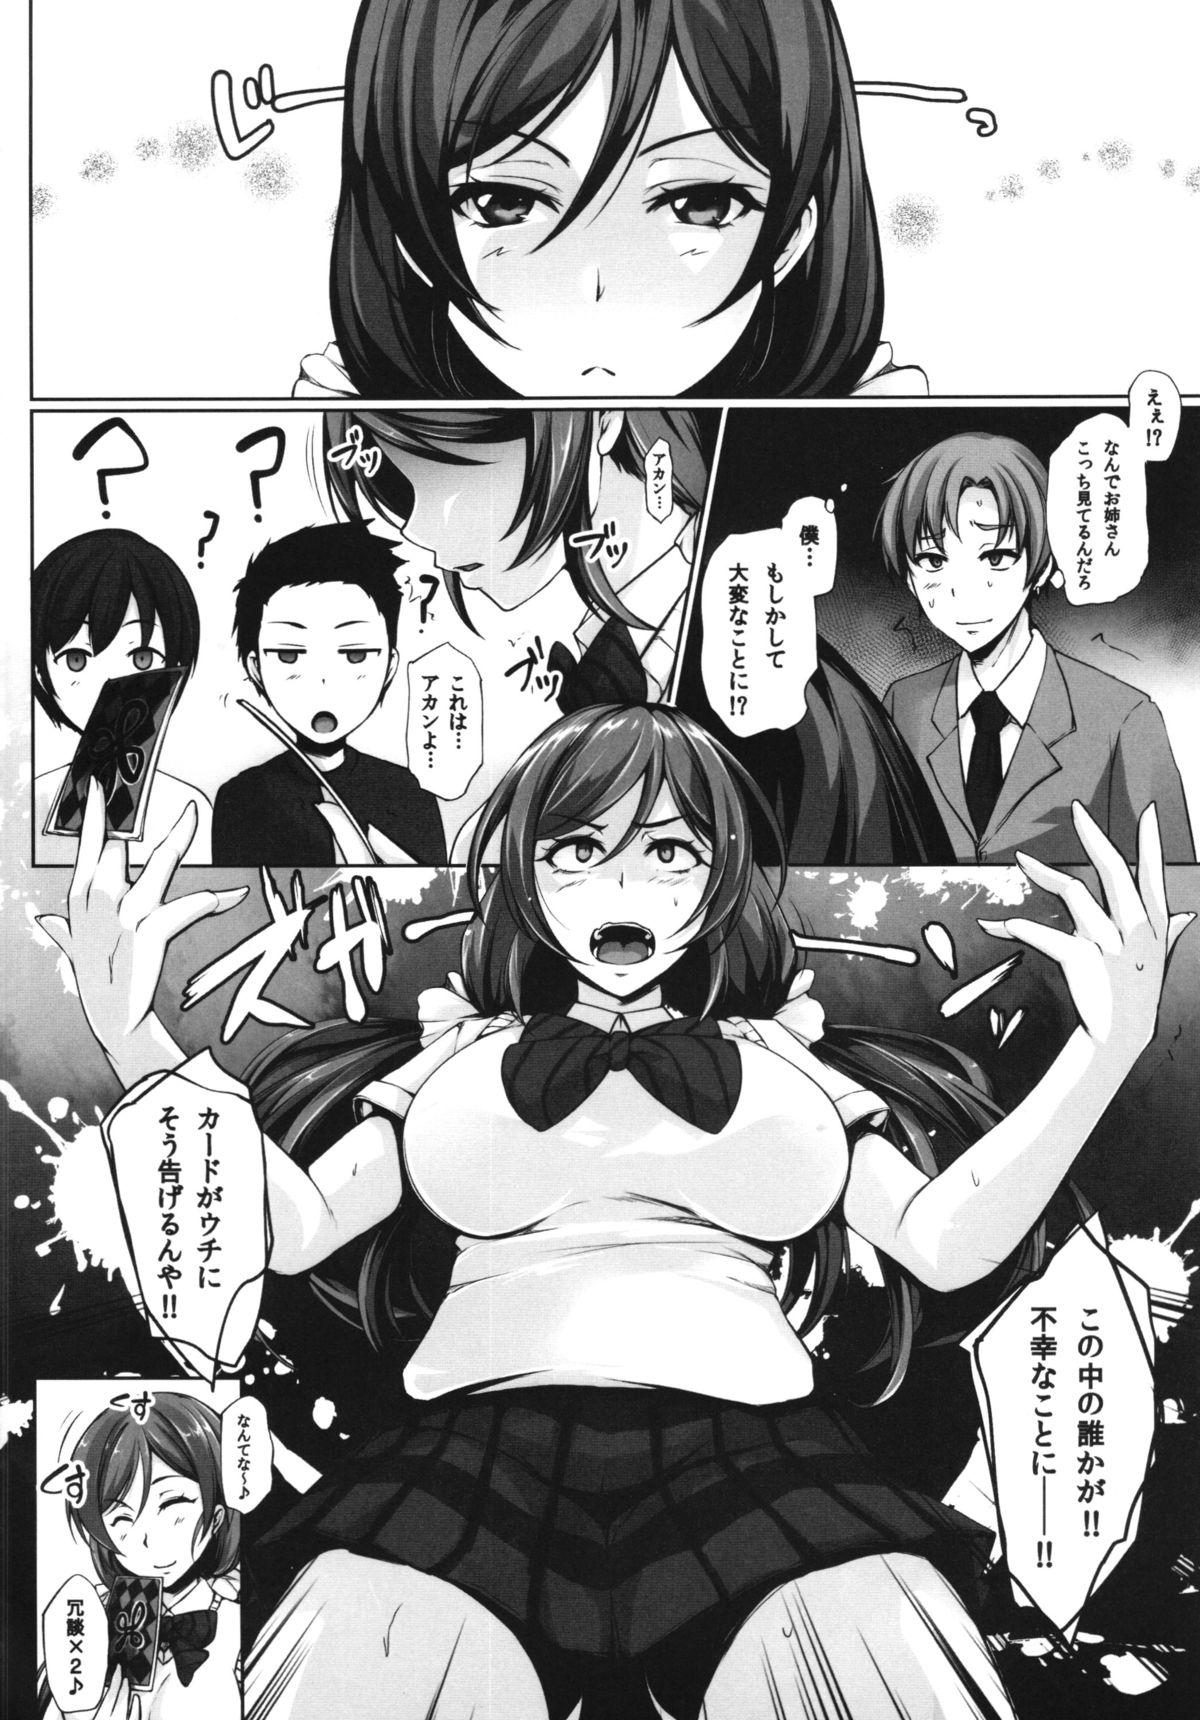 Spy LOVE-MIX! - Love live Hot Blow Jobs - Page 4